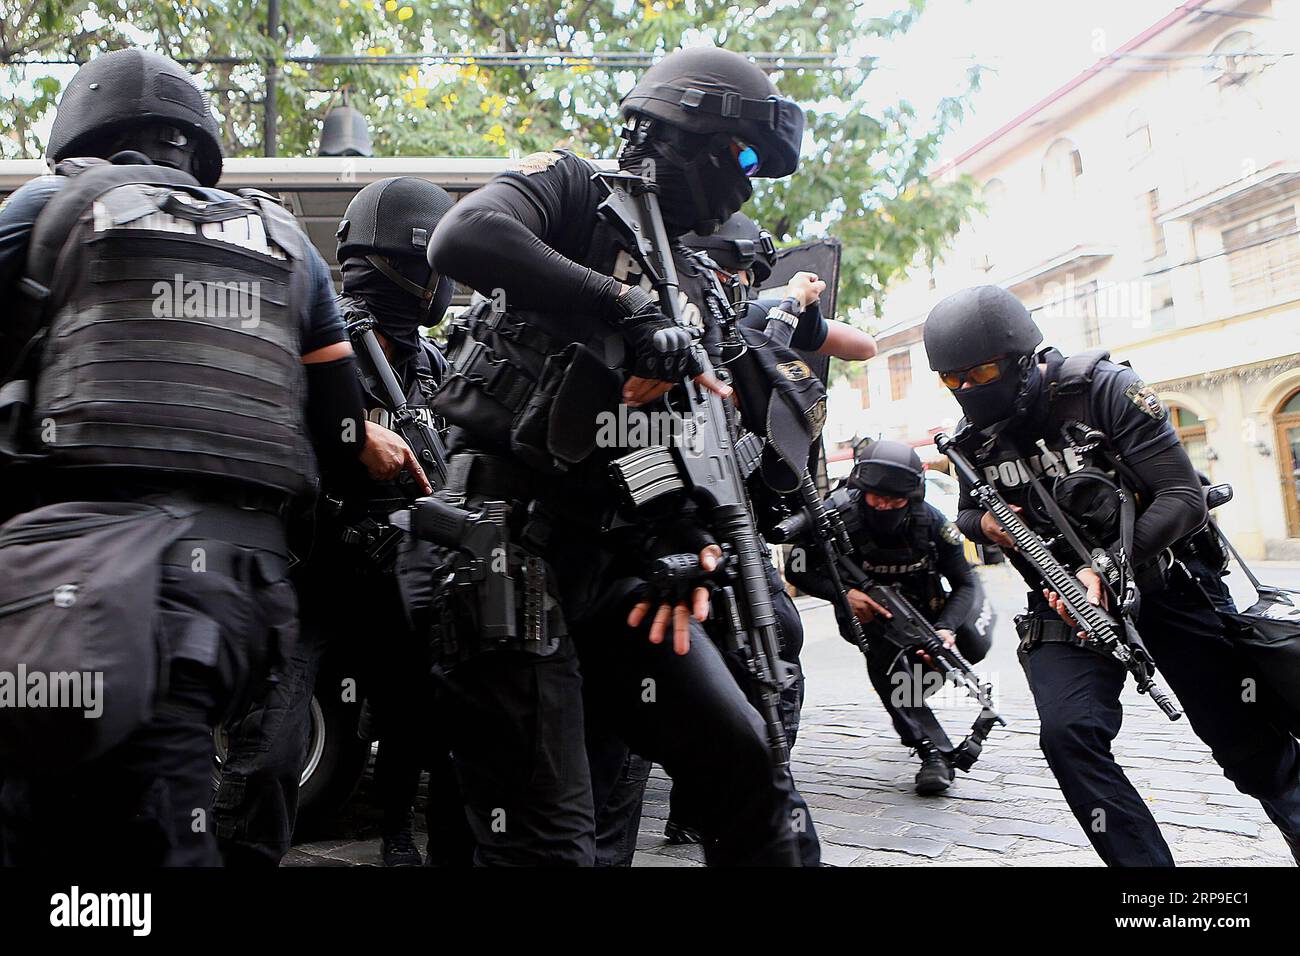 (190404) -- MANILA, April 4, 2019 -- Members of the Philippine National Police s Special Weapons and Tactics (PNP-SWAT) participate in an anti-terrorism drill in Manila, the Philippines, April 4, 2019. Philippine security forces have tightened security after Wednesday s blast in southern Philippine Isulan town in Sultan Kudarat province that wounded 18 people at least, a military general said on Thursday. ) PHILIPPINES-MANILA-ANTI-TERRORISM DRILL ROUELLExUMALI PUBLICATIONxNOTxINxCHN Stock Photo